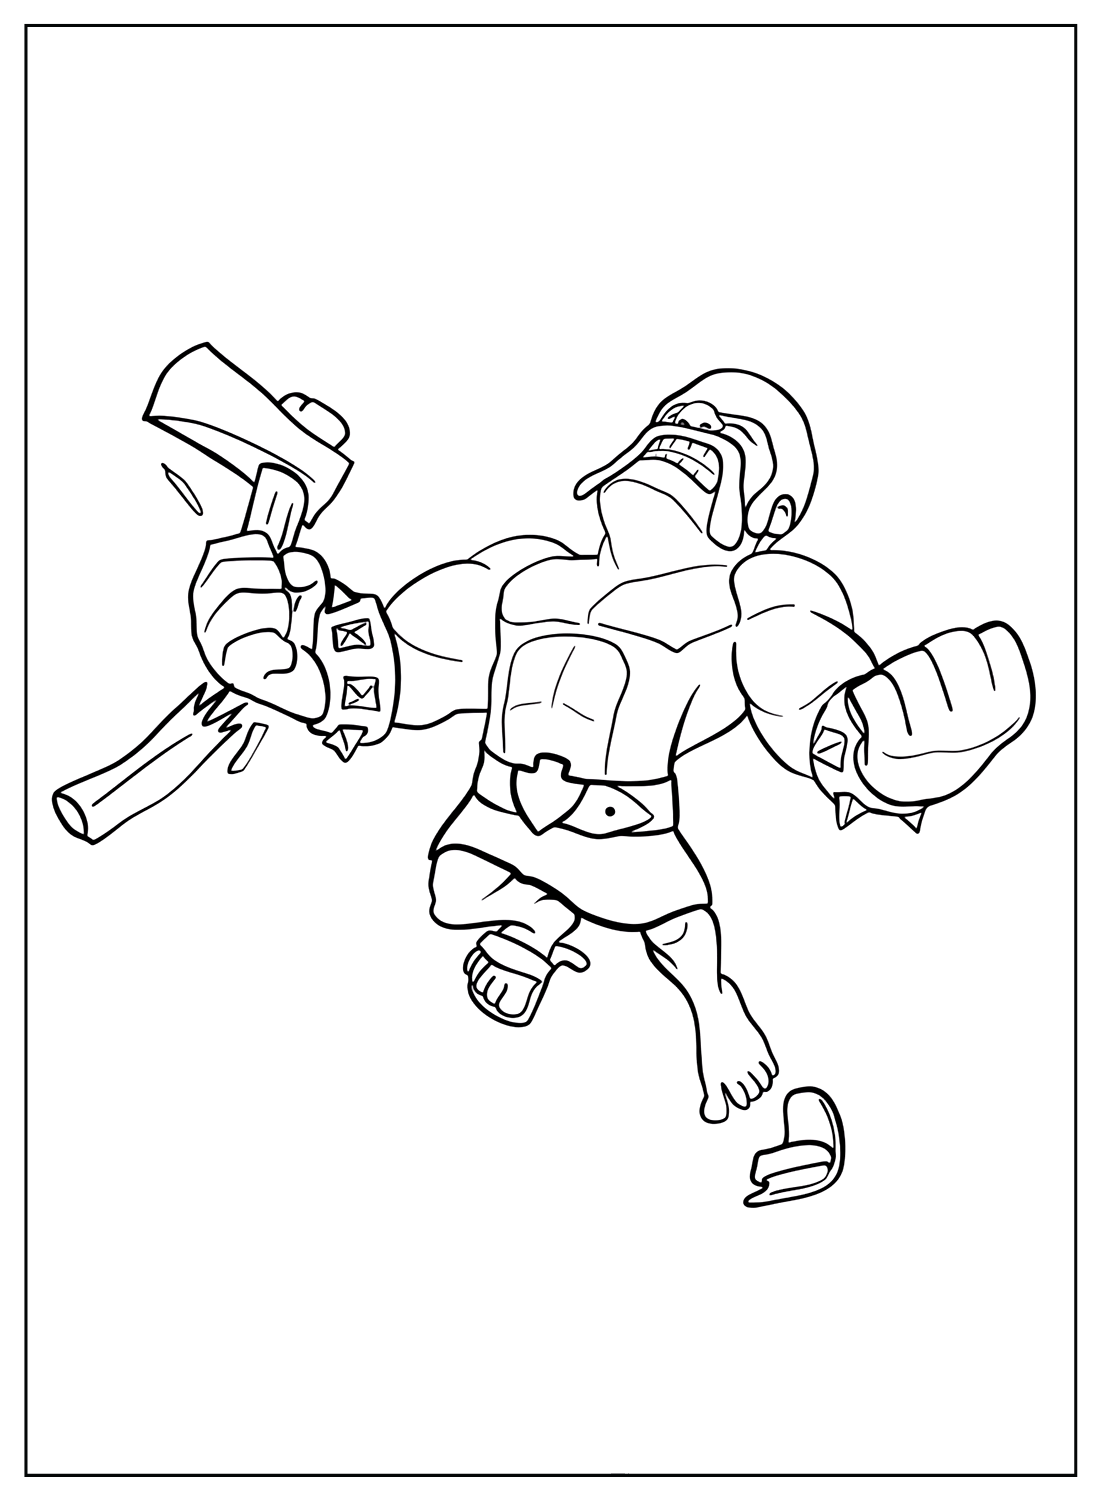 Free Clash of Clans Coloring Sheets from Clash of Clans